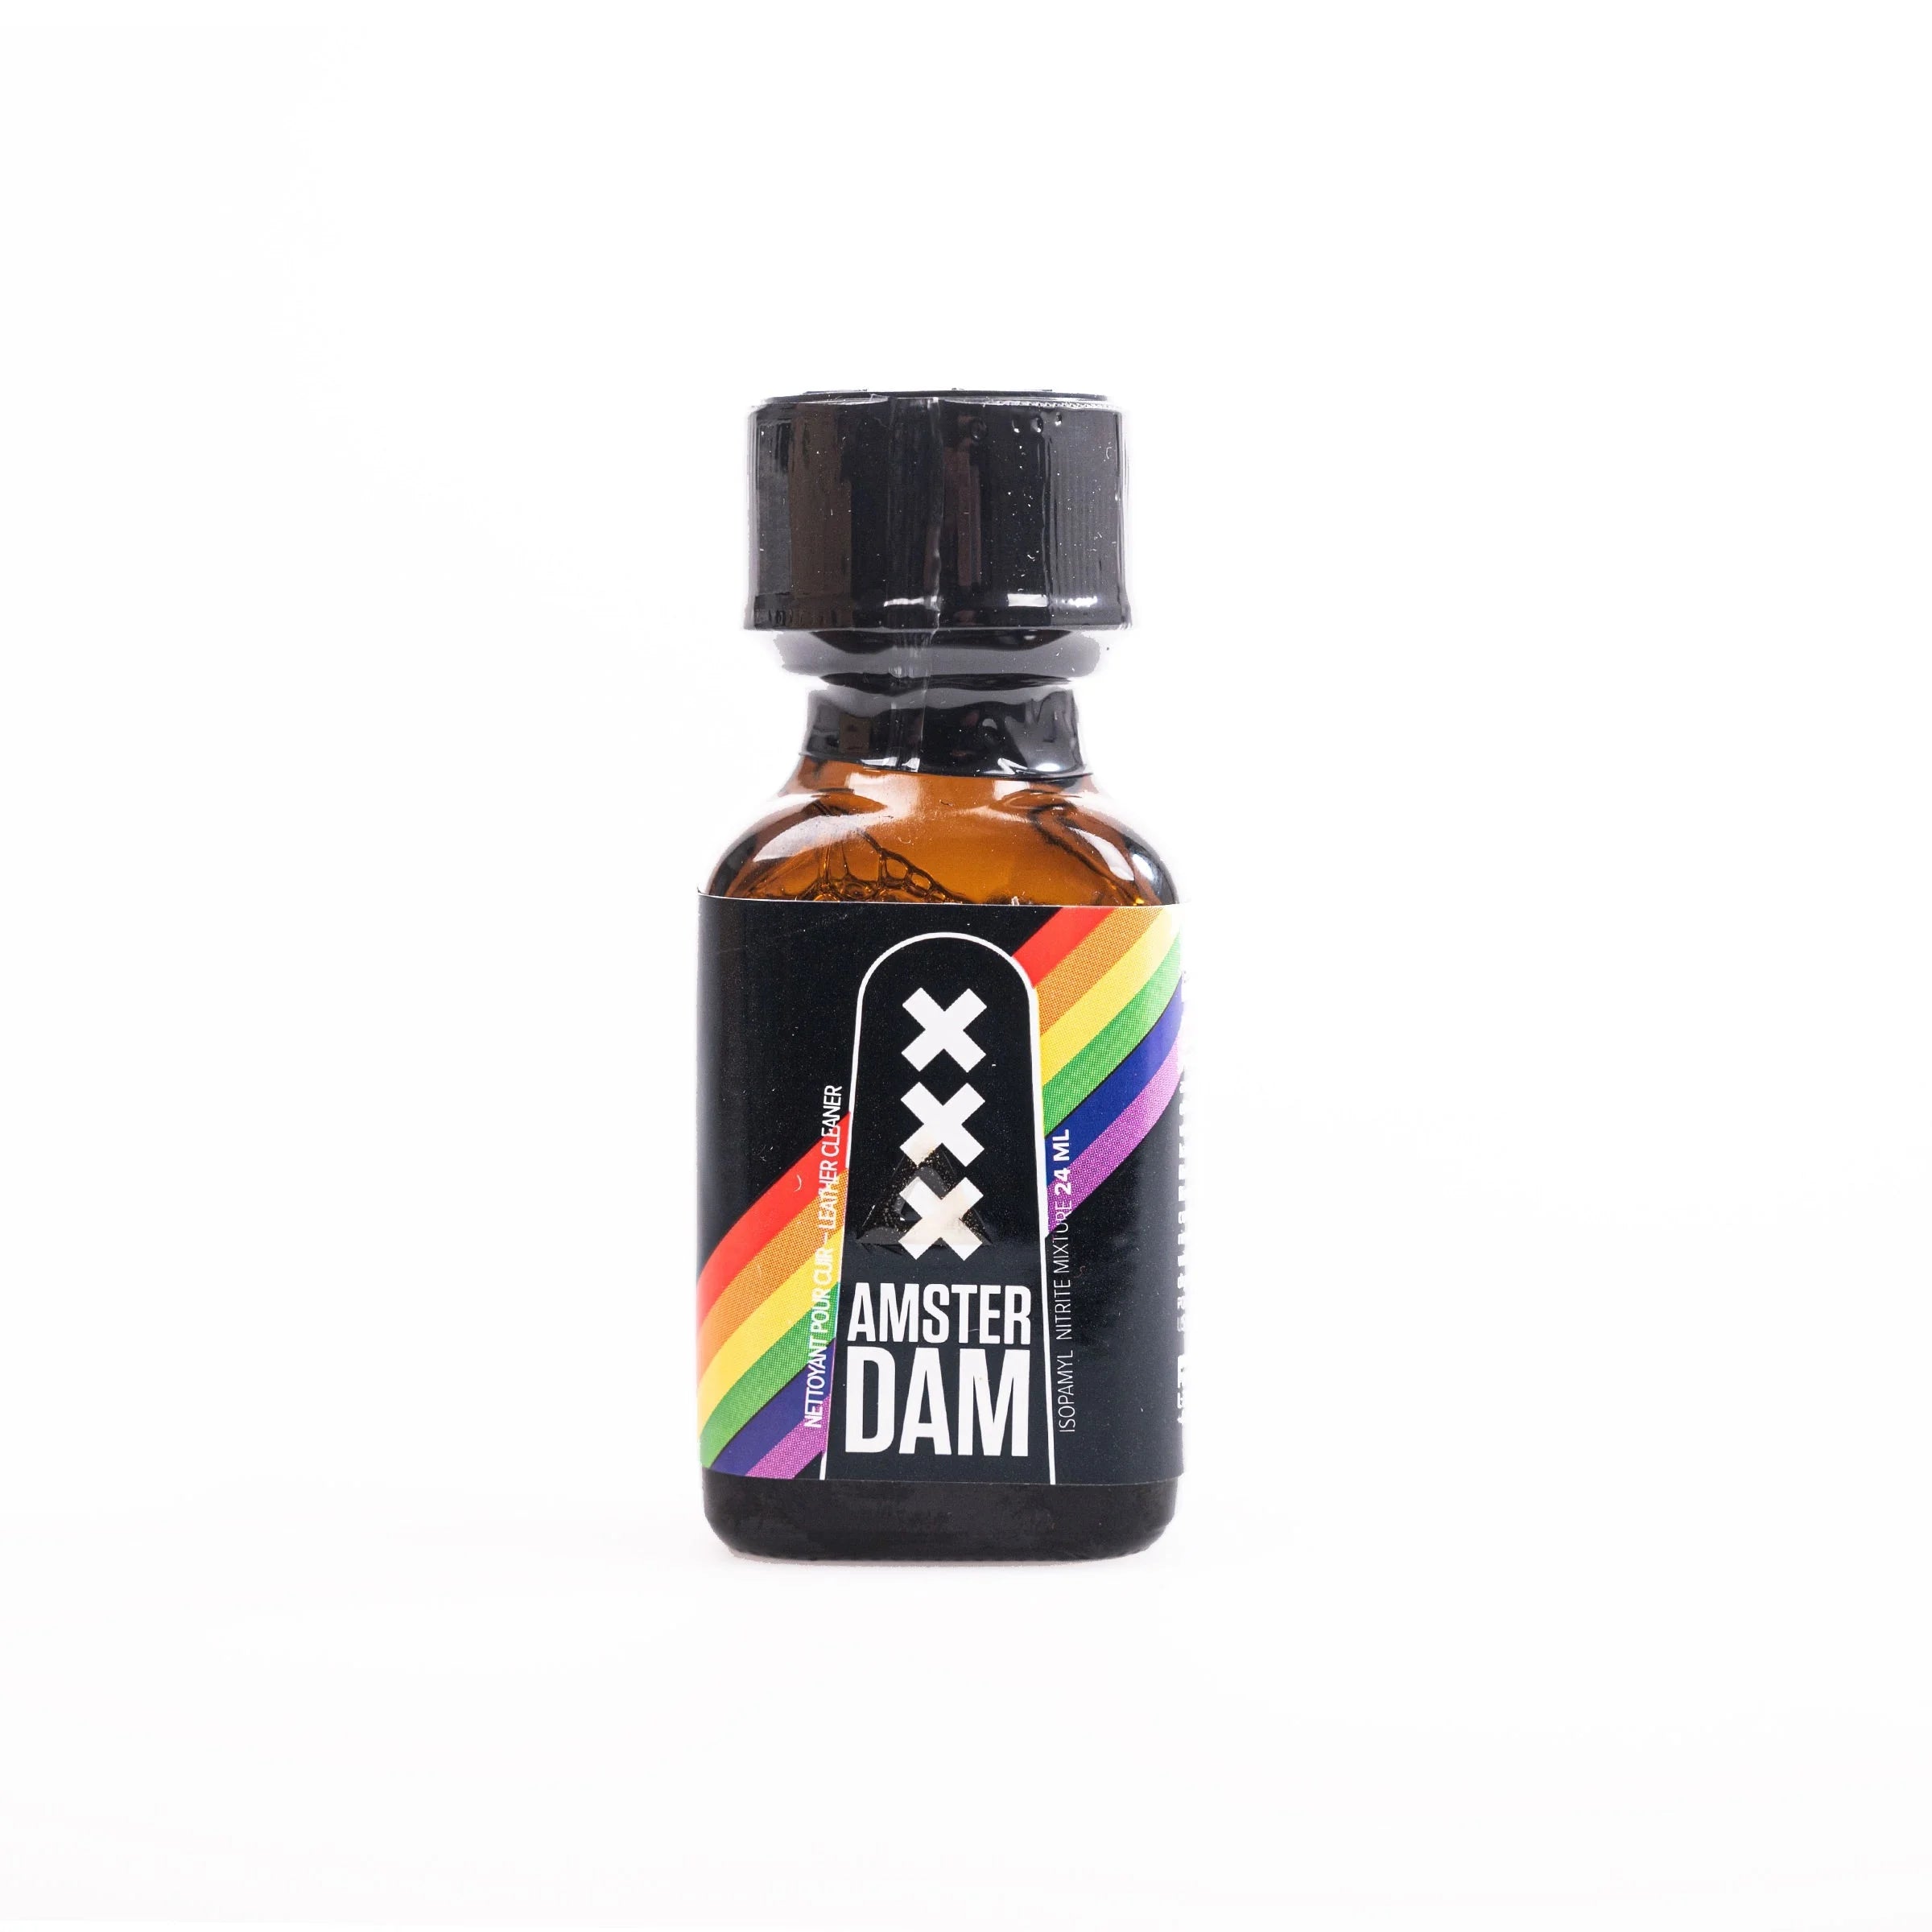 A product photo of a 24ml bottle of Amsterdam XXX Pride Poppers.